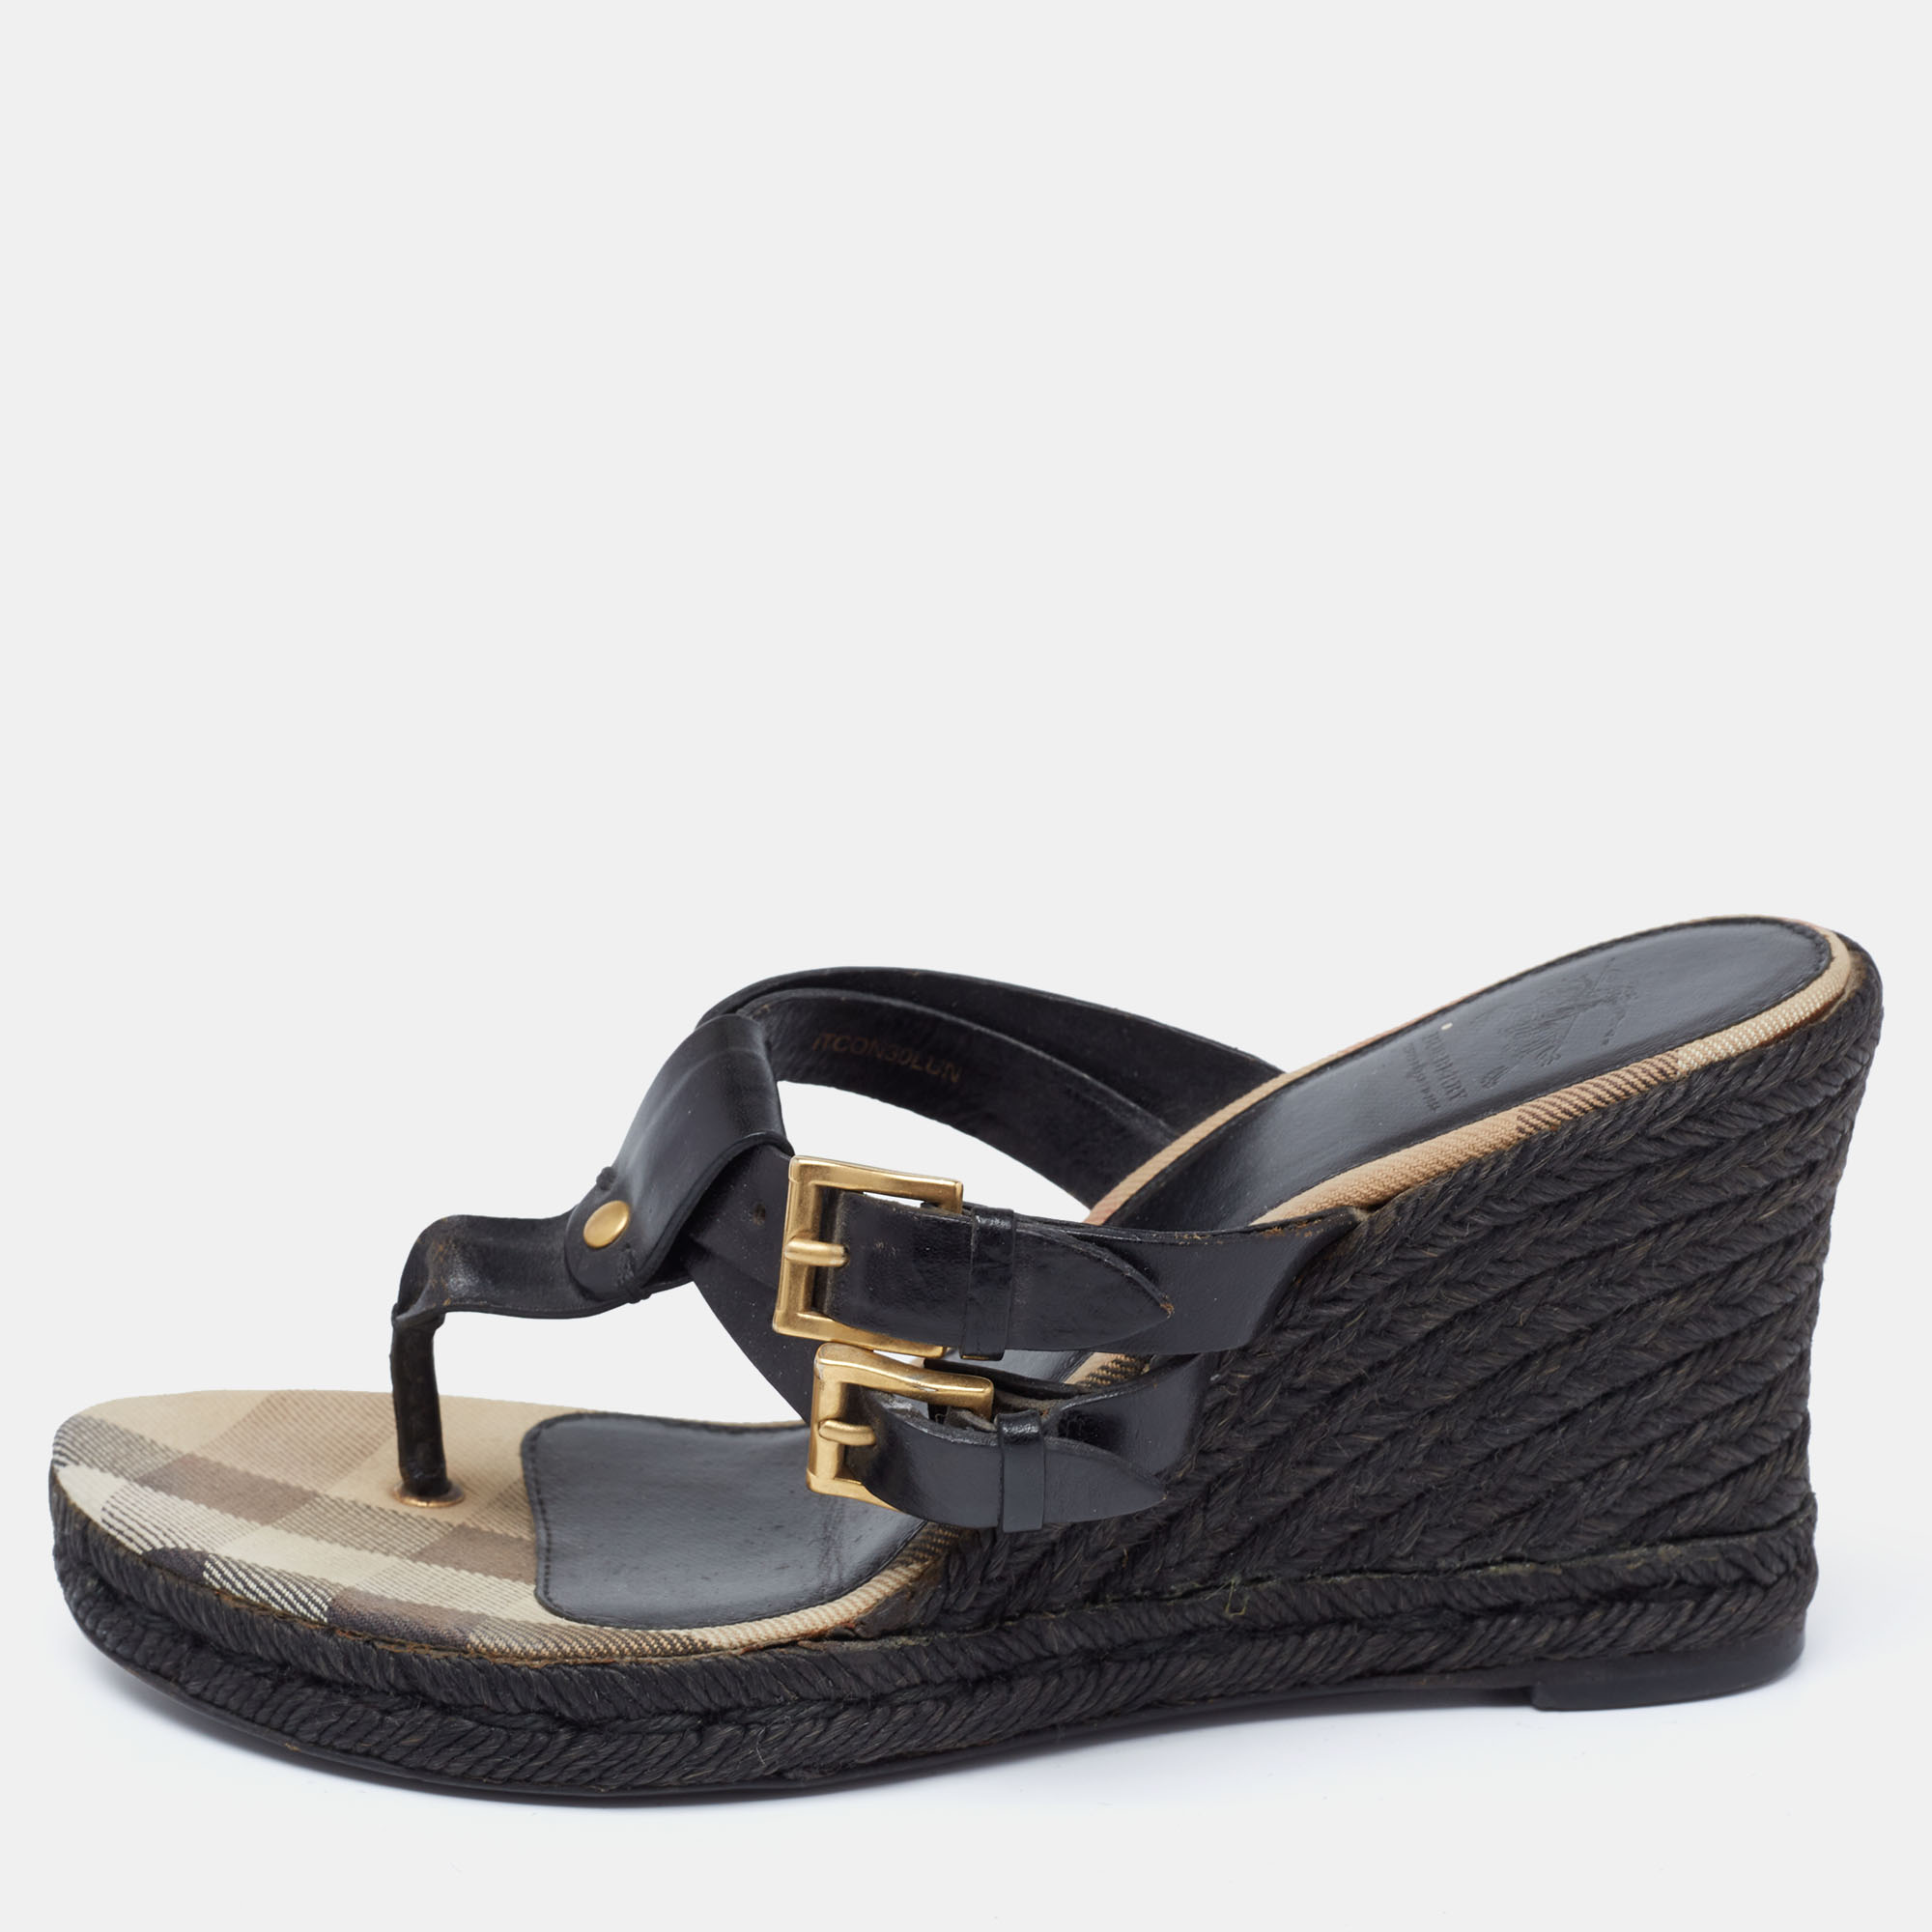 Burberry Black Leather Wedge Espadrille Thong Slide Sandals Size 39